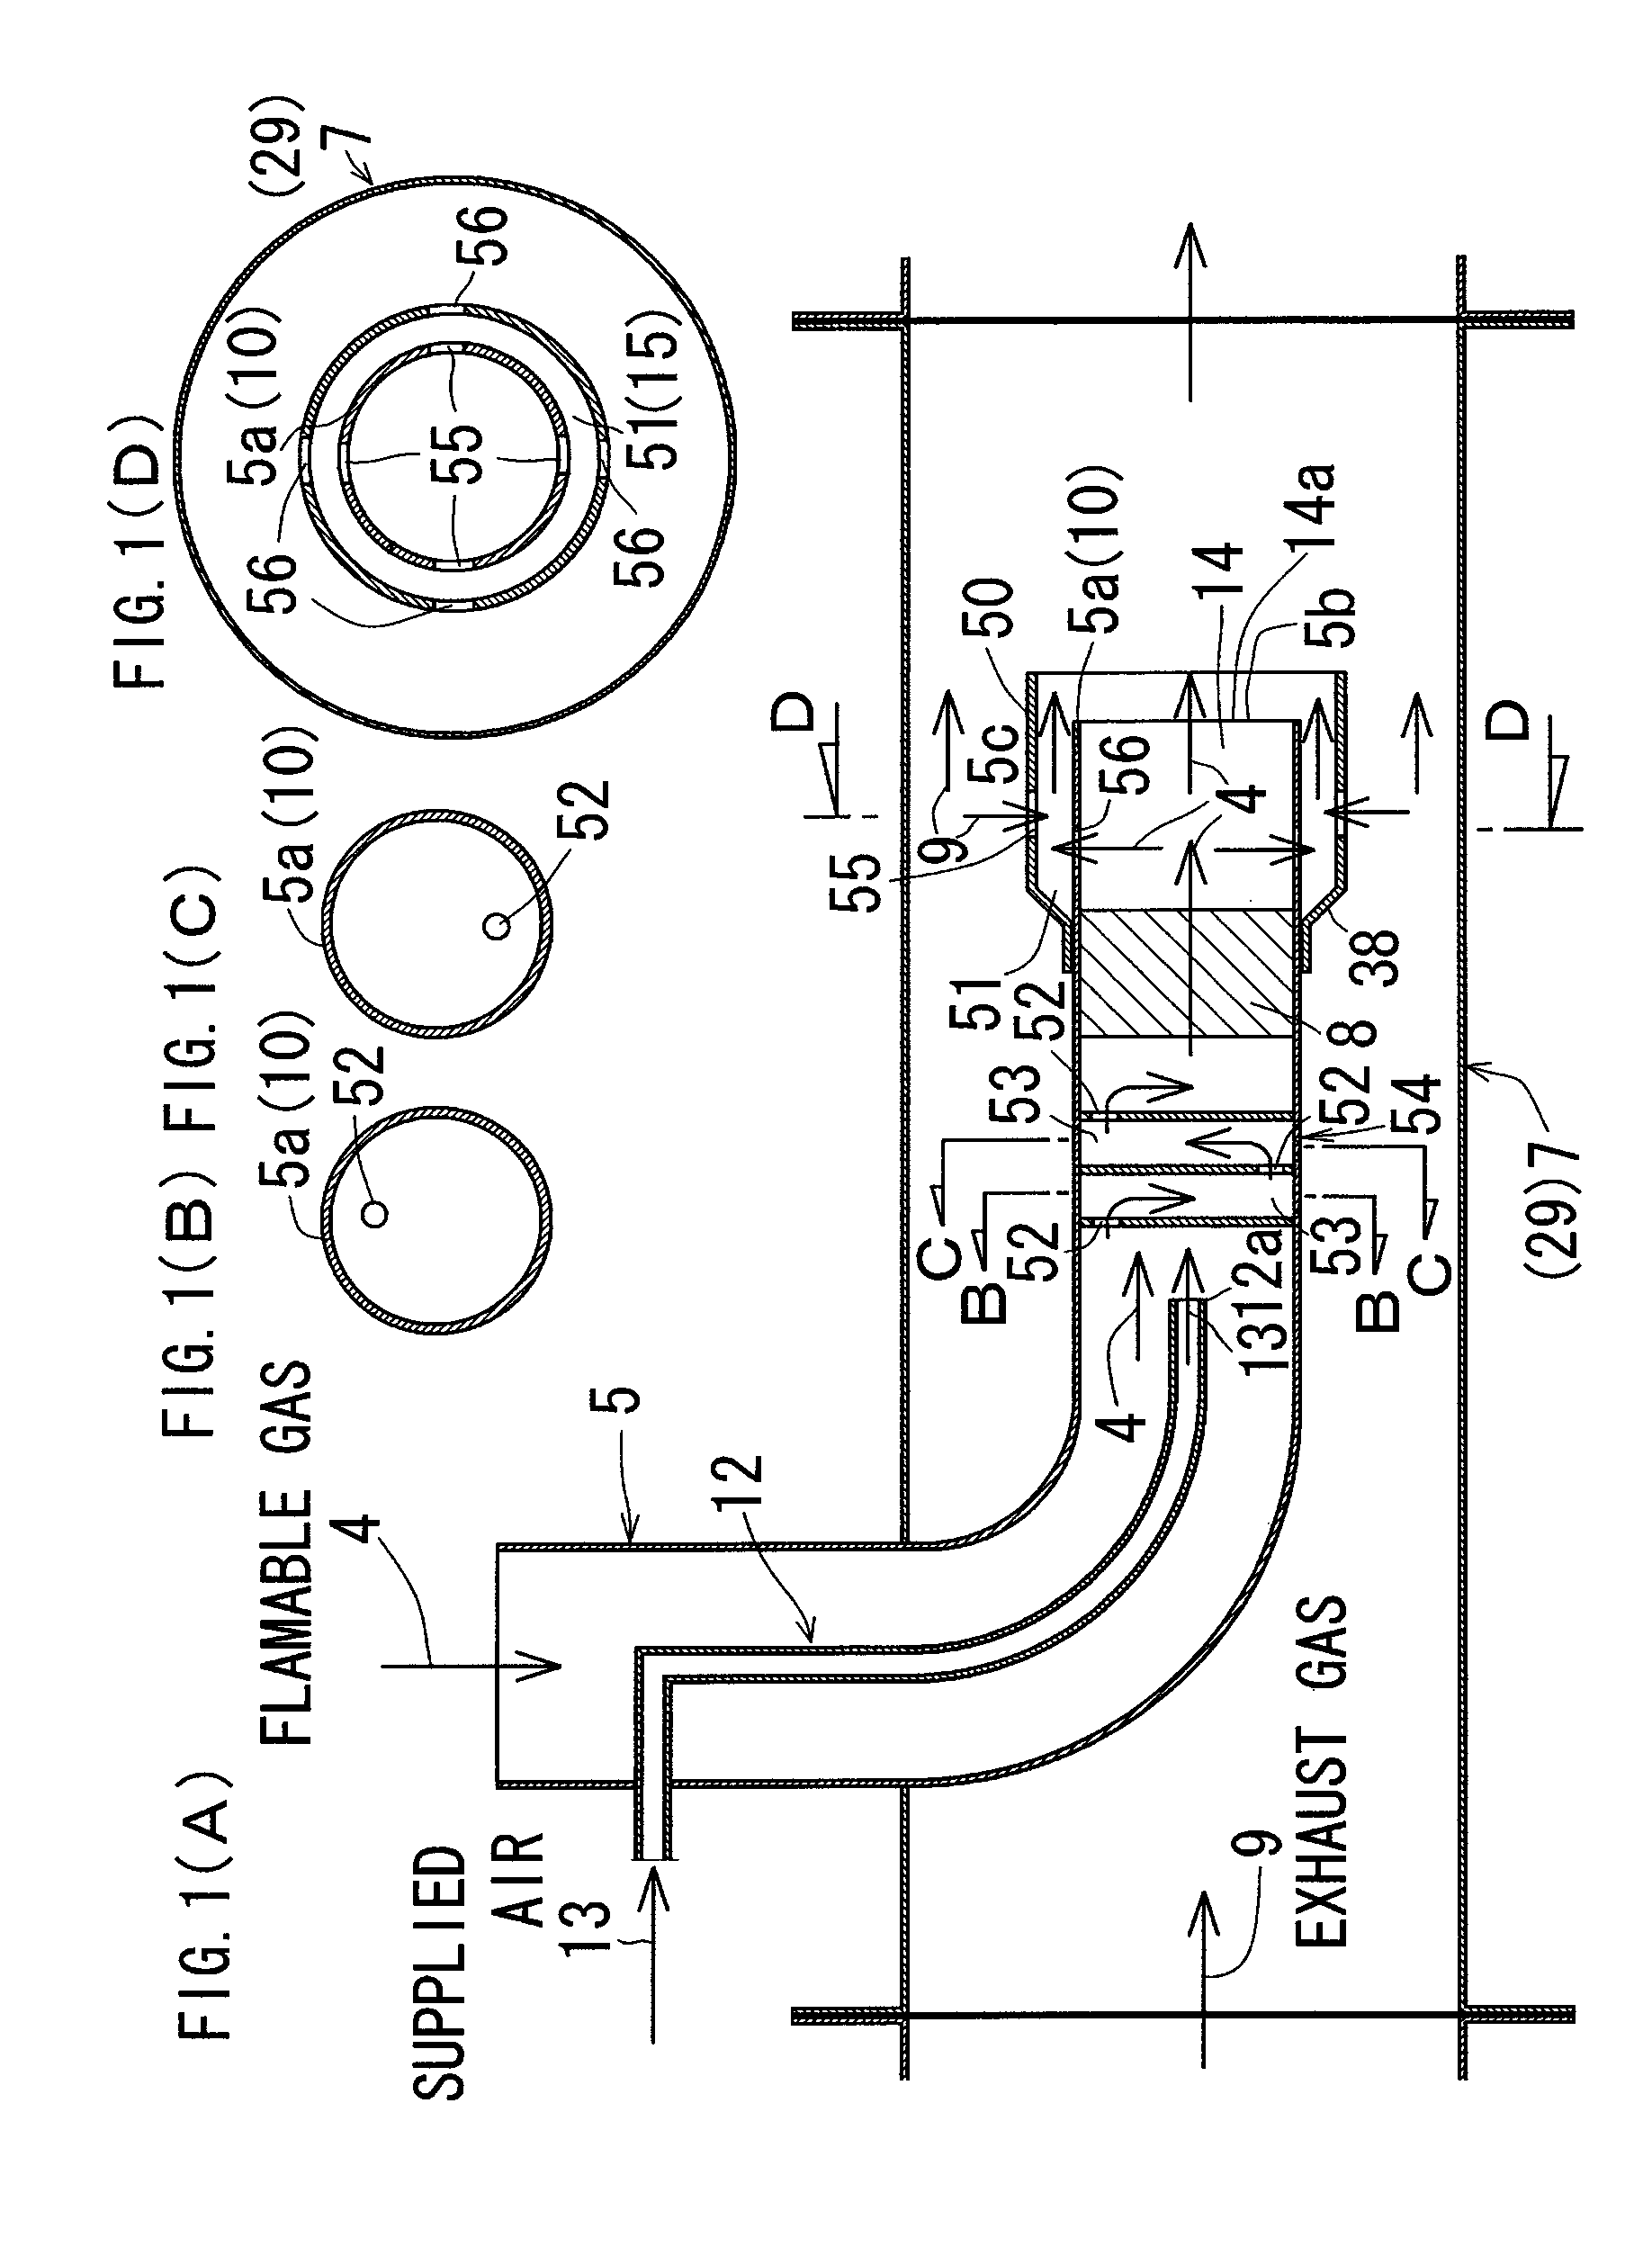 Exhaust device for a diesel engine